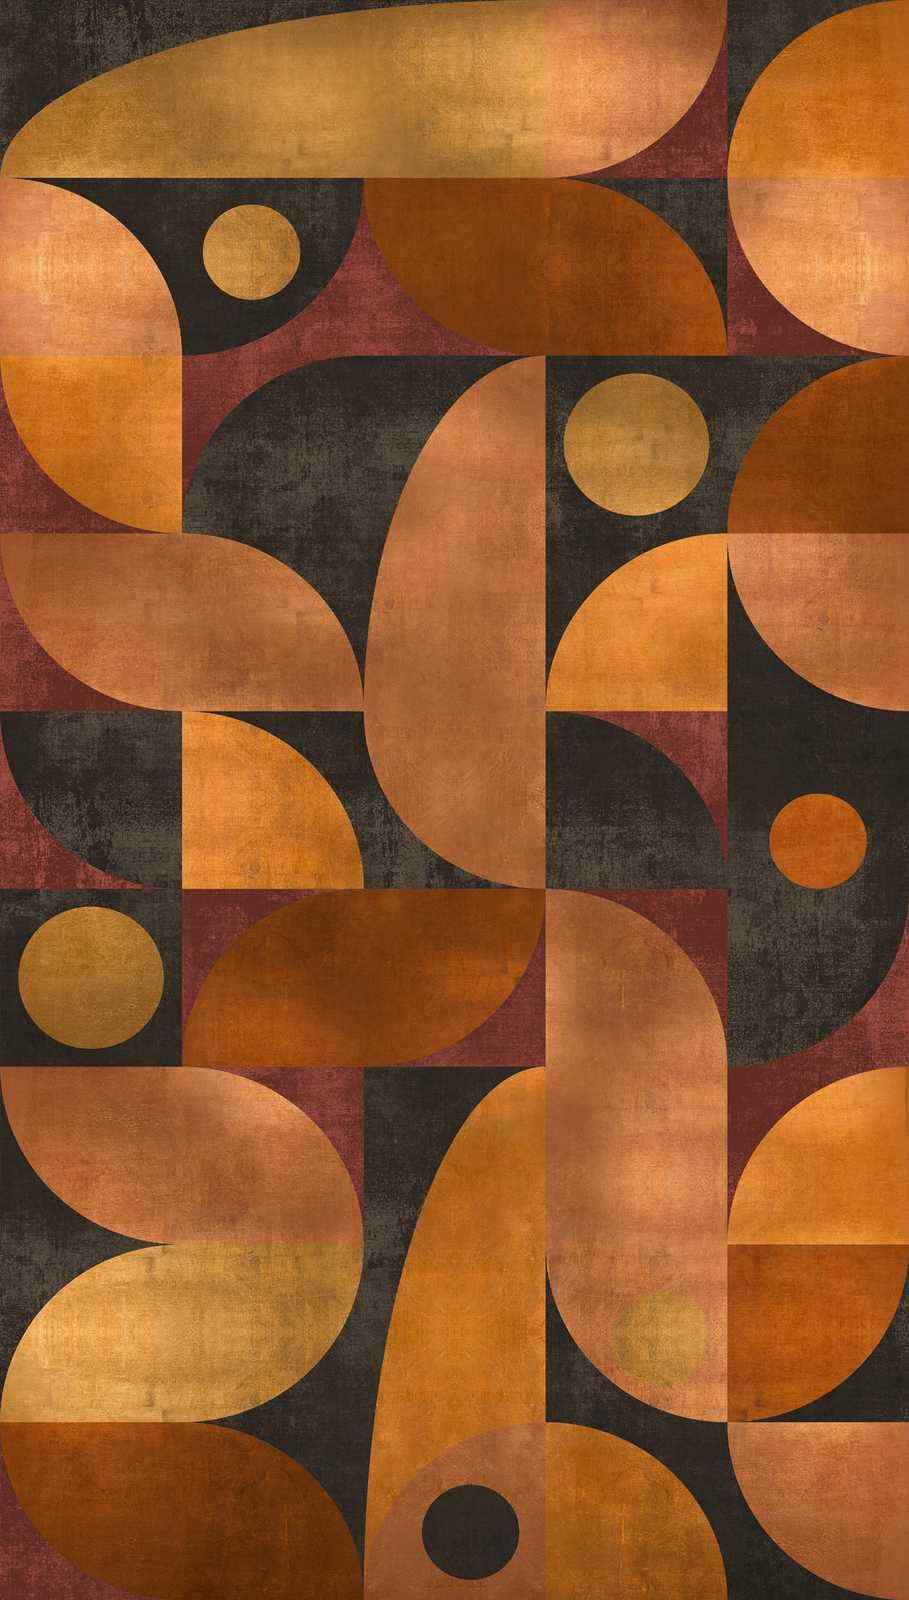             Non-woven wallpaper in warm tones with graphic round pattern - orange, brown, red
        